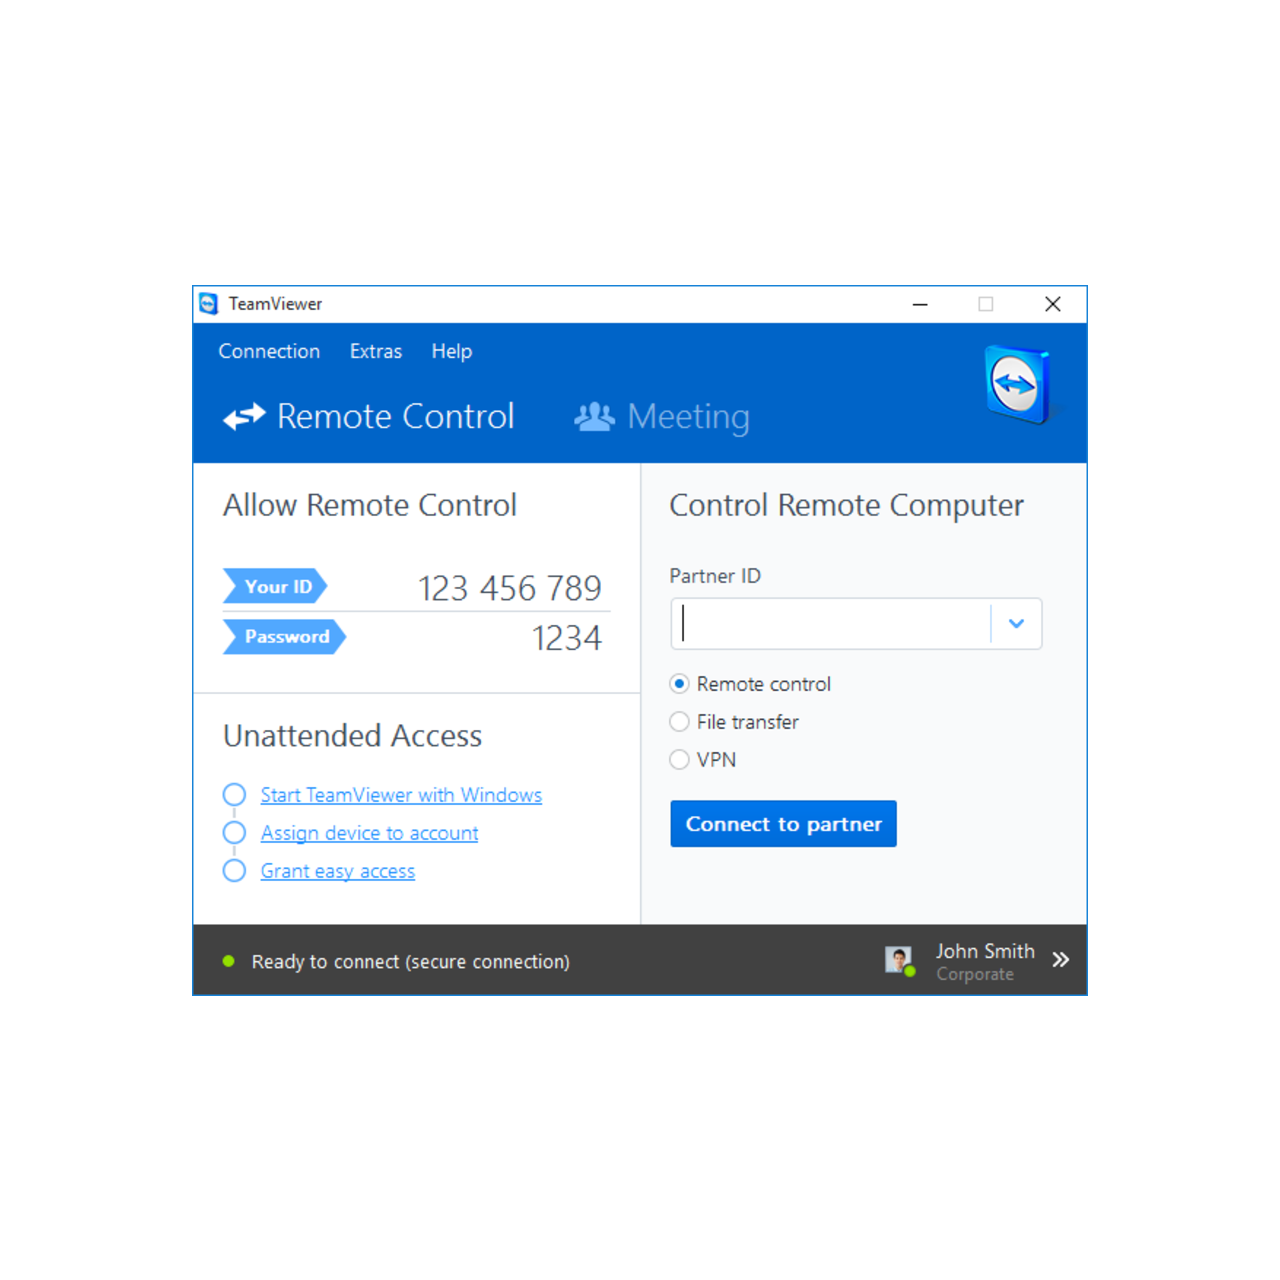 teamviewer 13 assign device to account greyed out